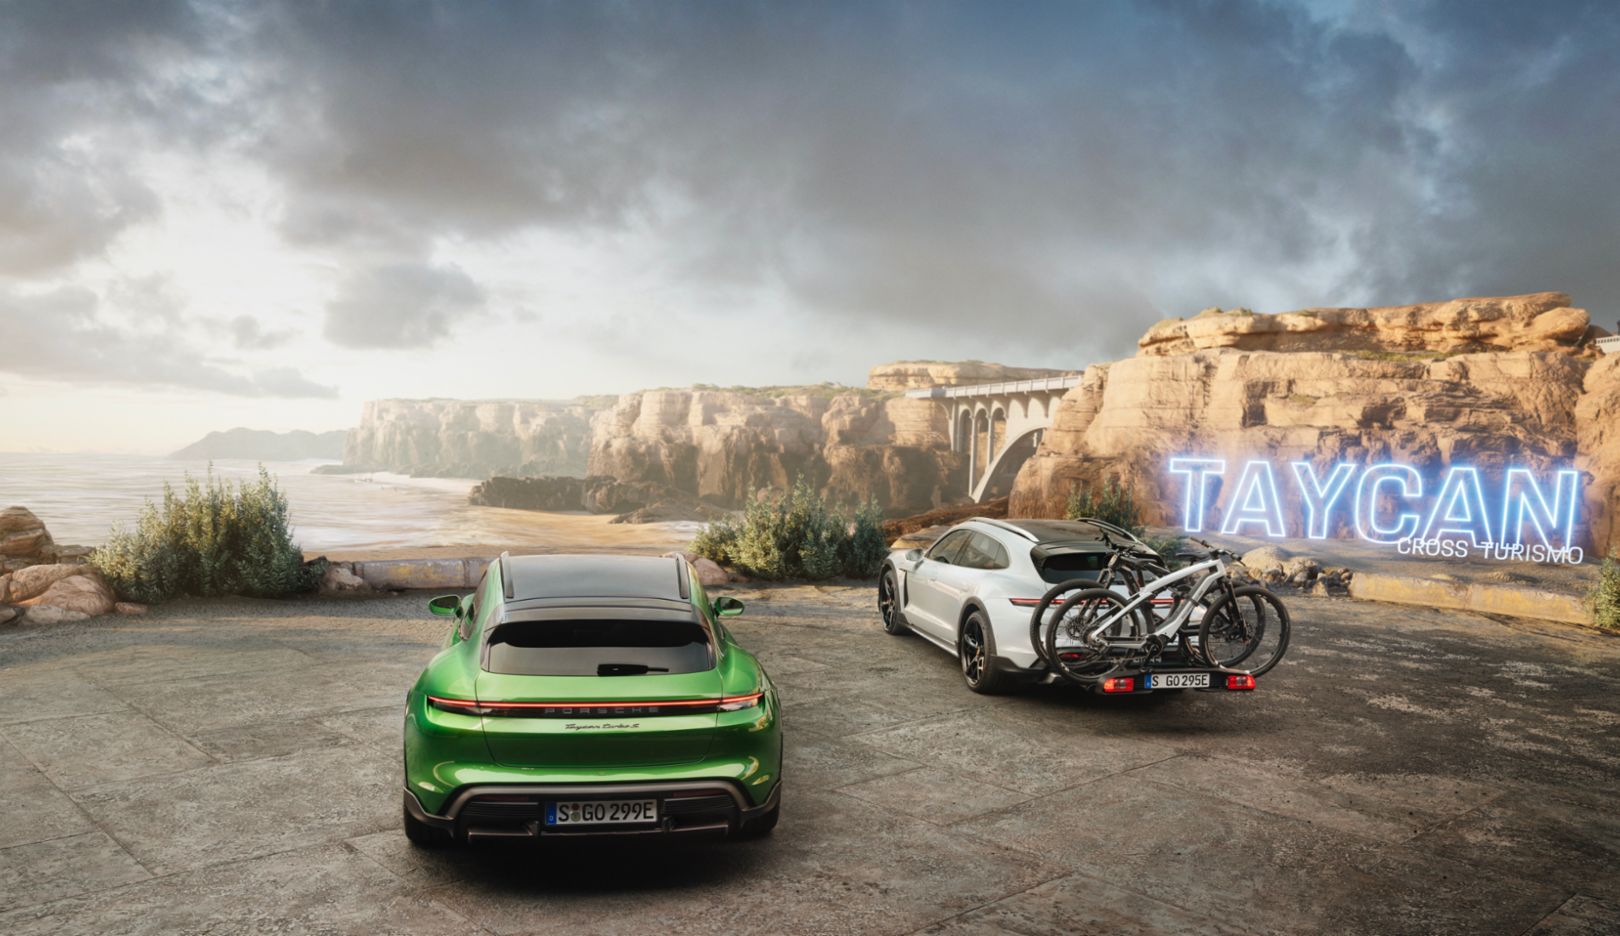 World premiere of the Taycan Cross Turismo: the all-rounder among electric sports cars